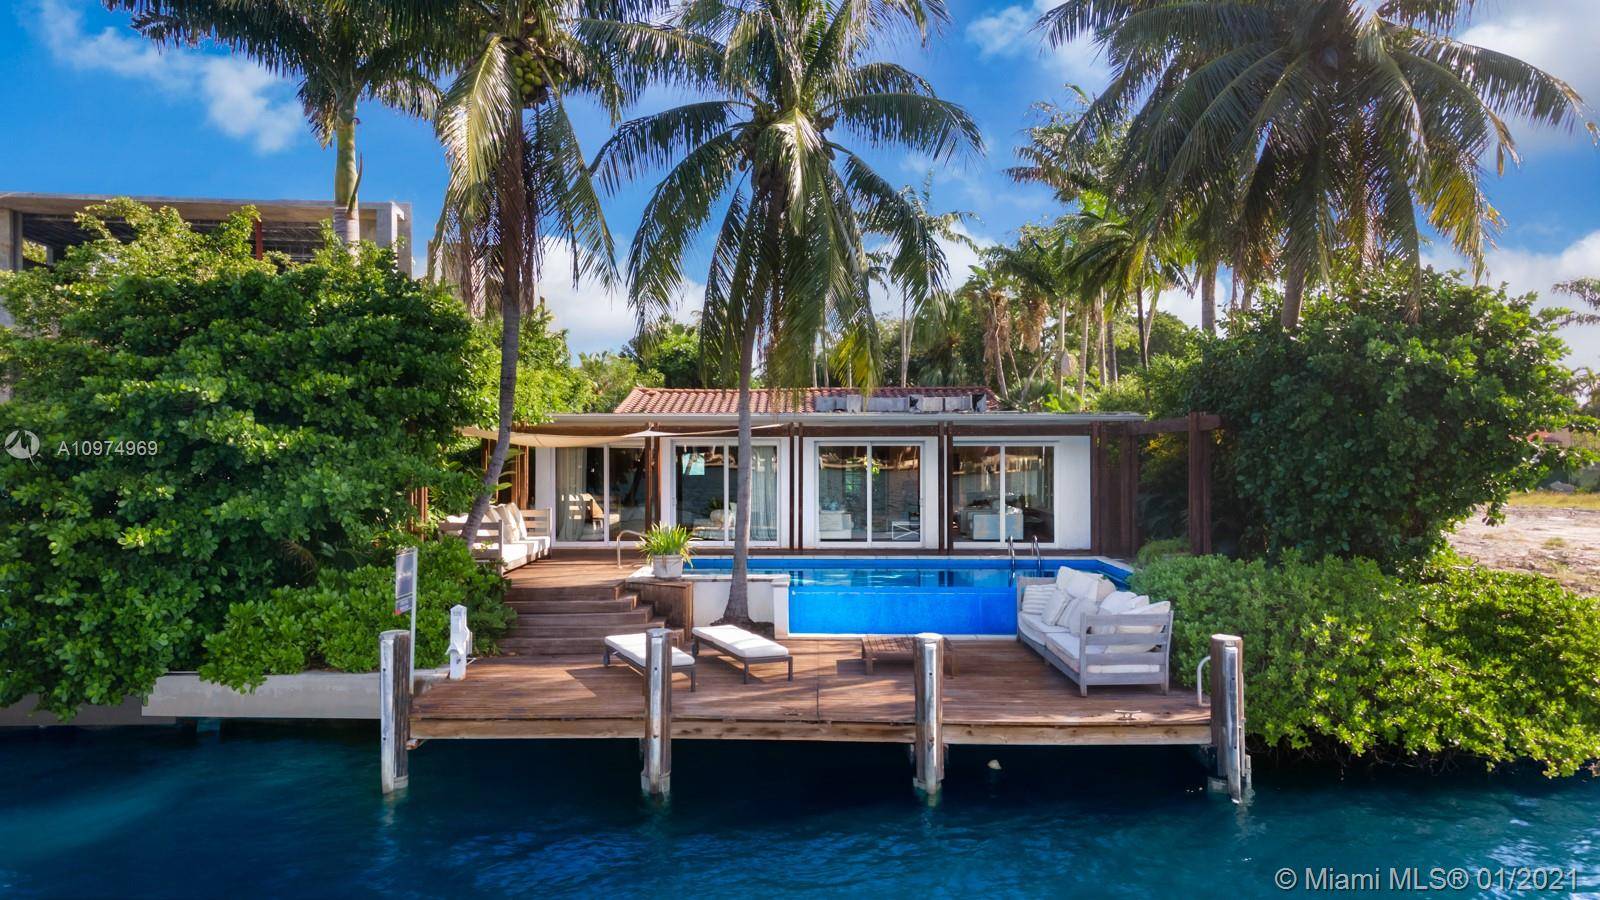 Breakfasts by the pool and moonlit dinners overlooking Biscayne Bay await at this 4Bed 4 Bath waterfront bungalow.